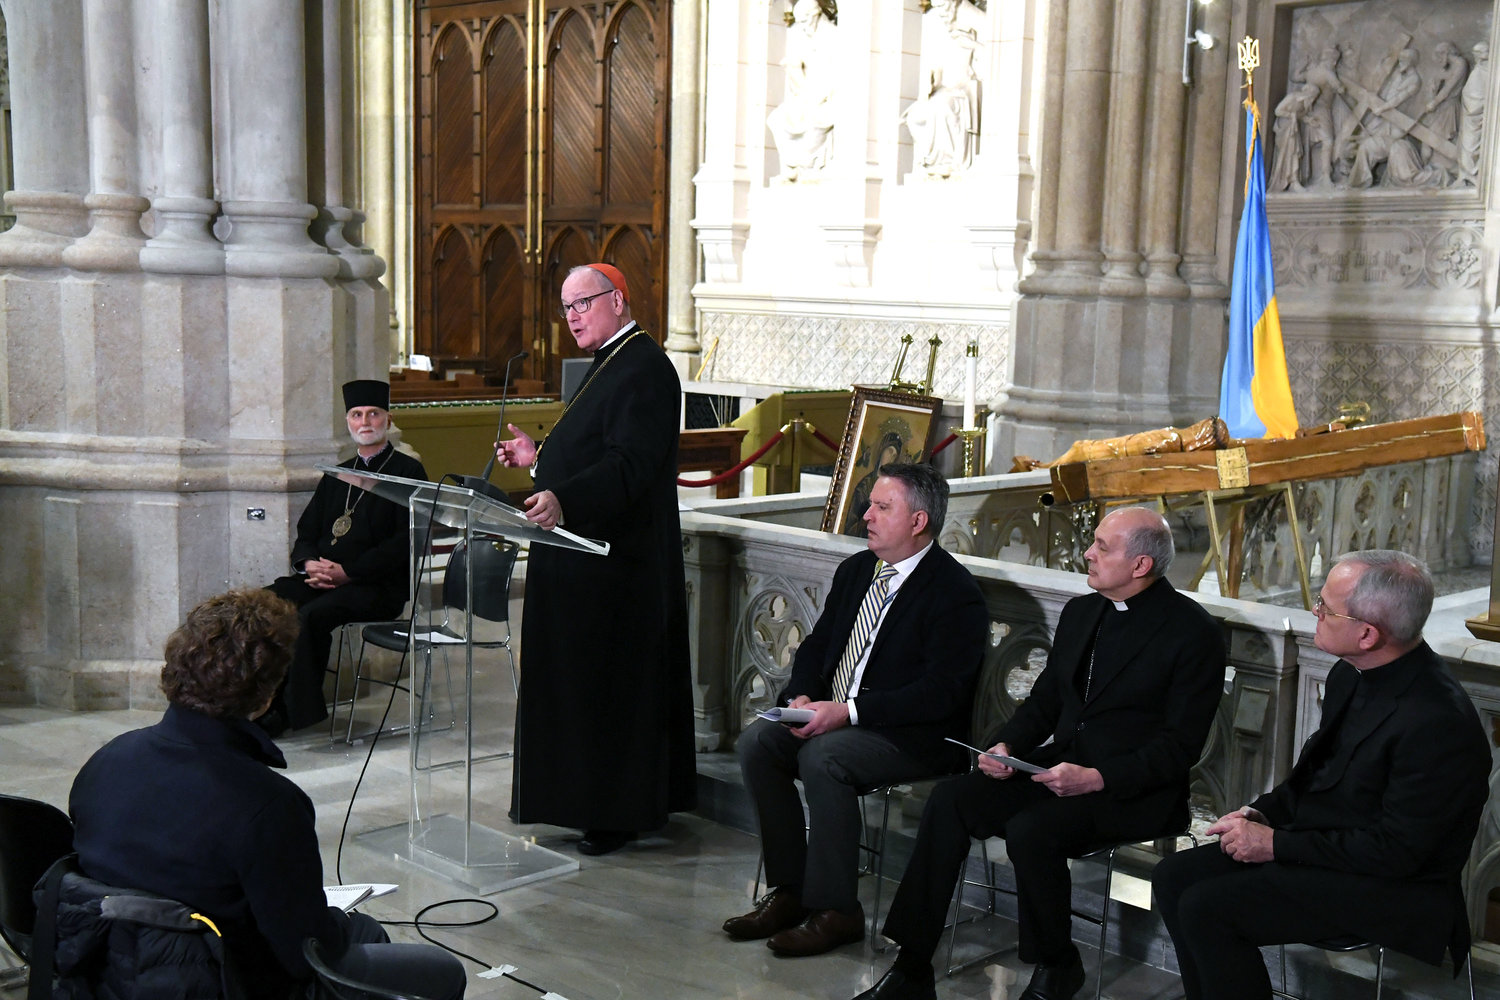 Cardinal Dolan speaks at a March 24 press briefing at St. Patrick's Cathedral about the war in Ukraine and U.S. Church efforts to assist refugees and other displaced persons in Ukraine. Seated, from left, are Archbishop Borys Gudziak of the Ukrainian Catholic Archeparchy of Philadelphia; Ambassador Sergiy Kyslytsya, Ukraine's ambassador to the United Nations; Archbishop Gabriele Cacchia, Vatican nuncio to the United Nations; and Msgr. Peter Vaccari, president of Catholic Near East Welfare Association (CNEWA), a papal agency headquartered in Manhattan. In the background is the Ukrainian Cross of Gratitude, positioned next to the Ukrainian flag.